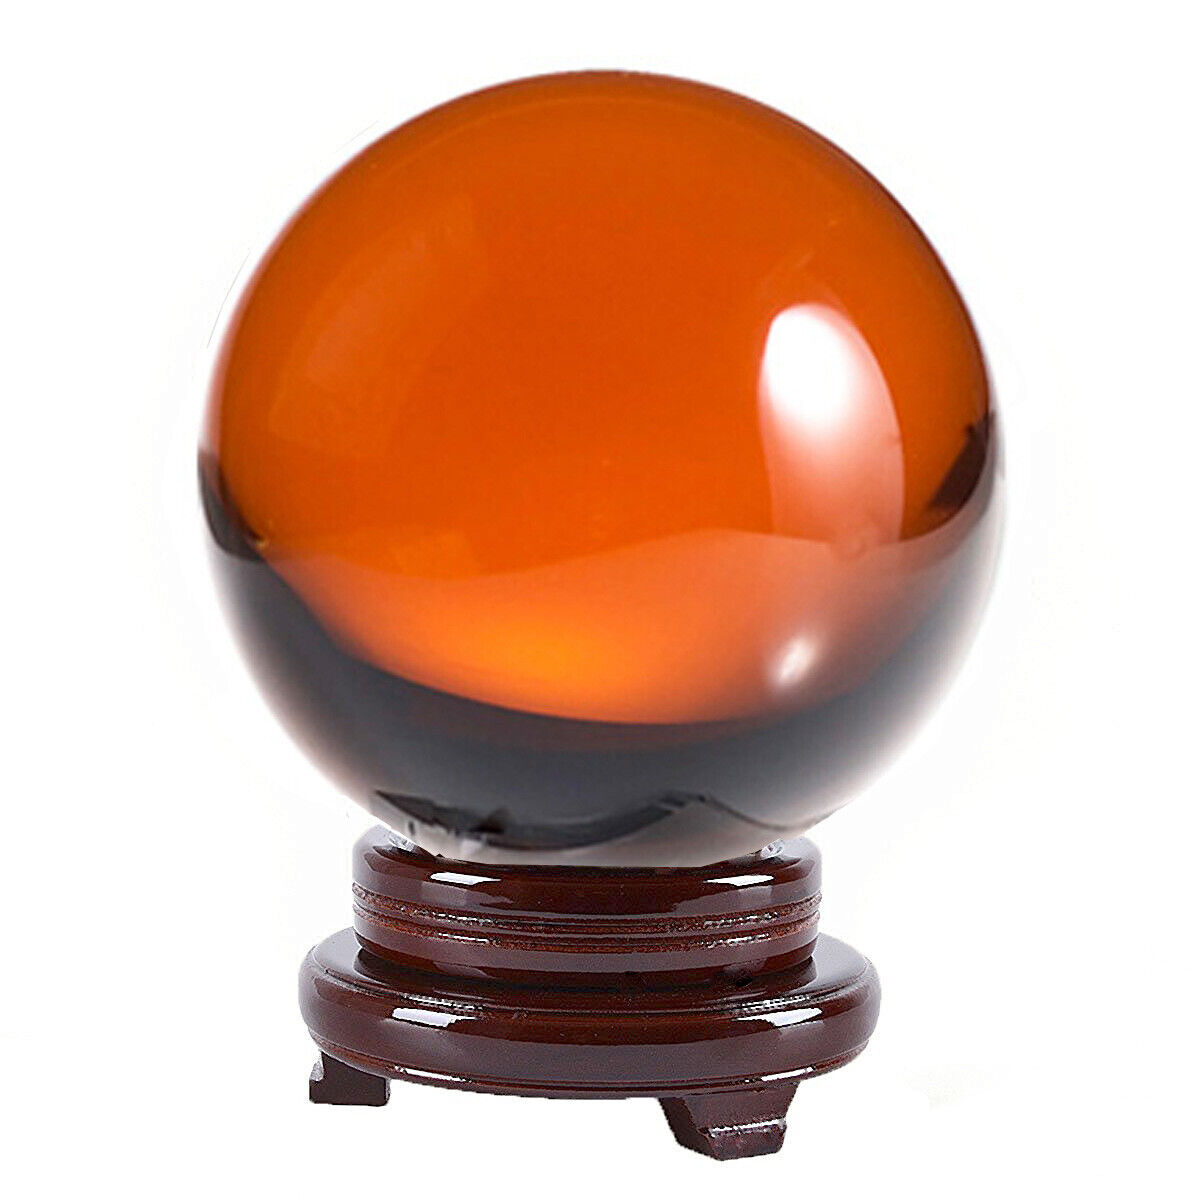 Amlong Crystal Meditation Divination Sphere Crystal Ball with Wood Stand